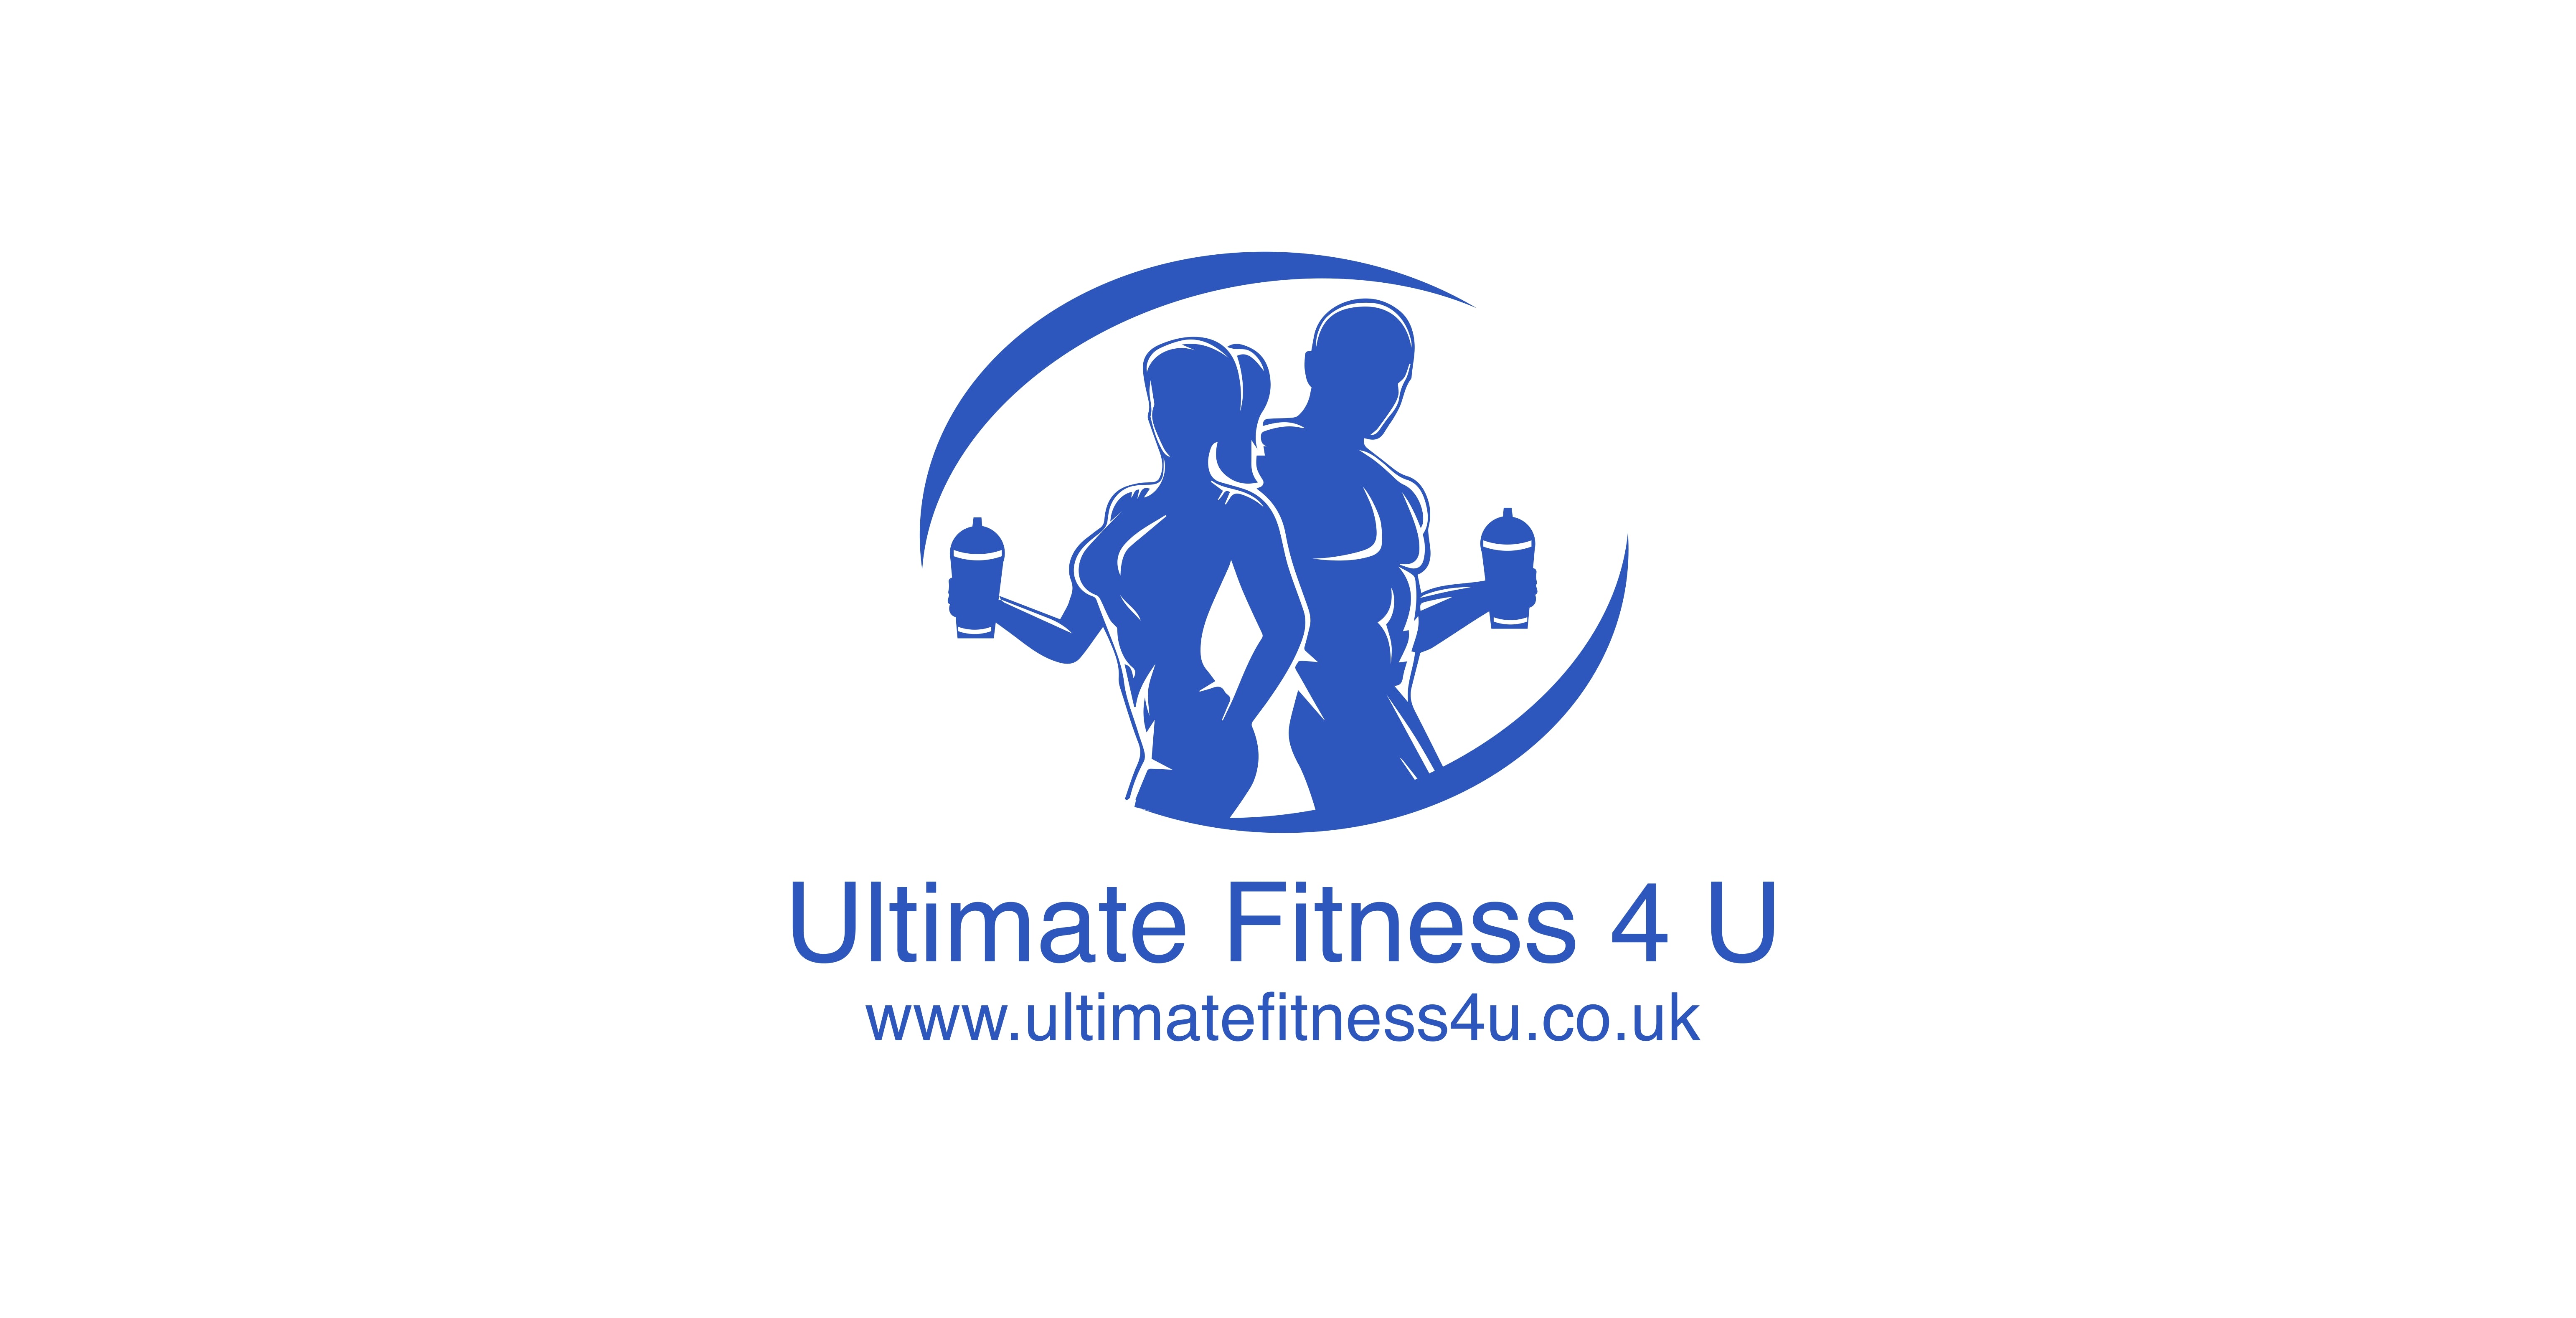 Ultimate Fitness 4 U - Protein - Pre workouts - Health Foods